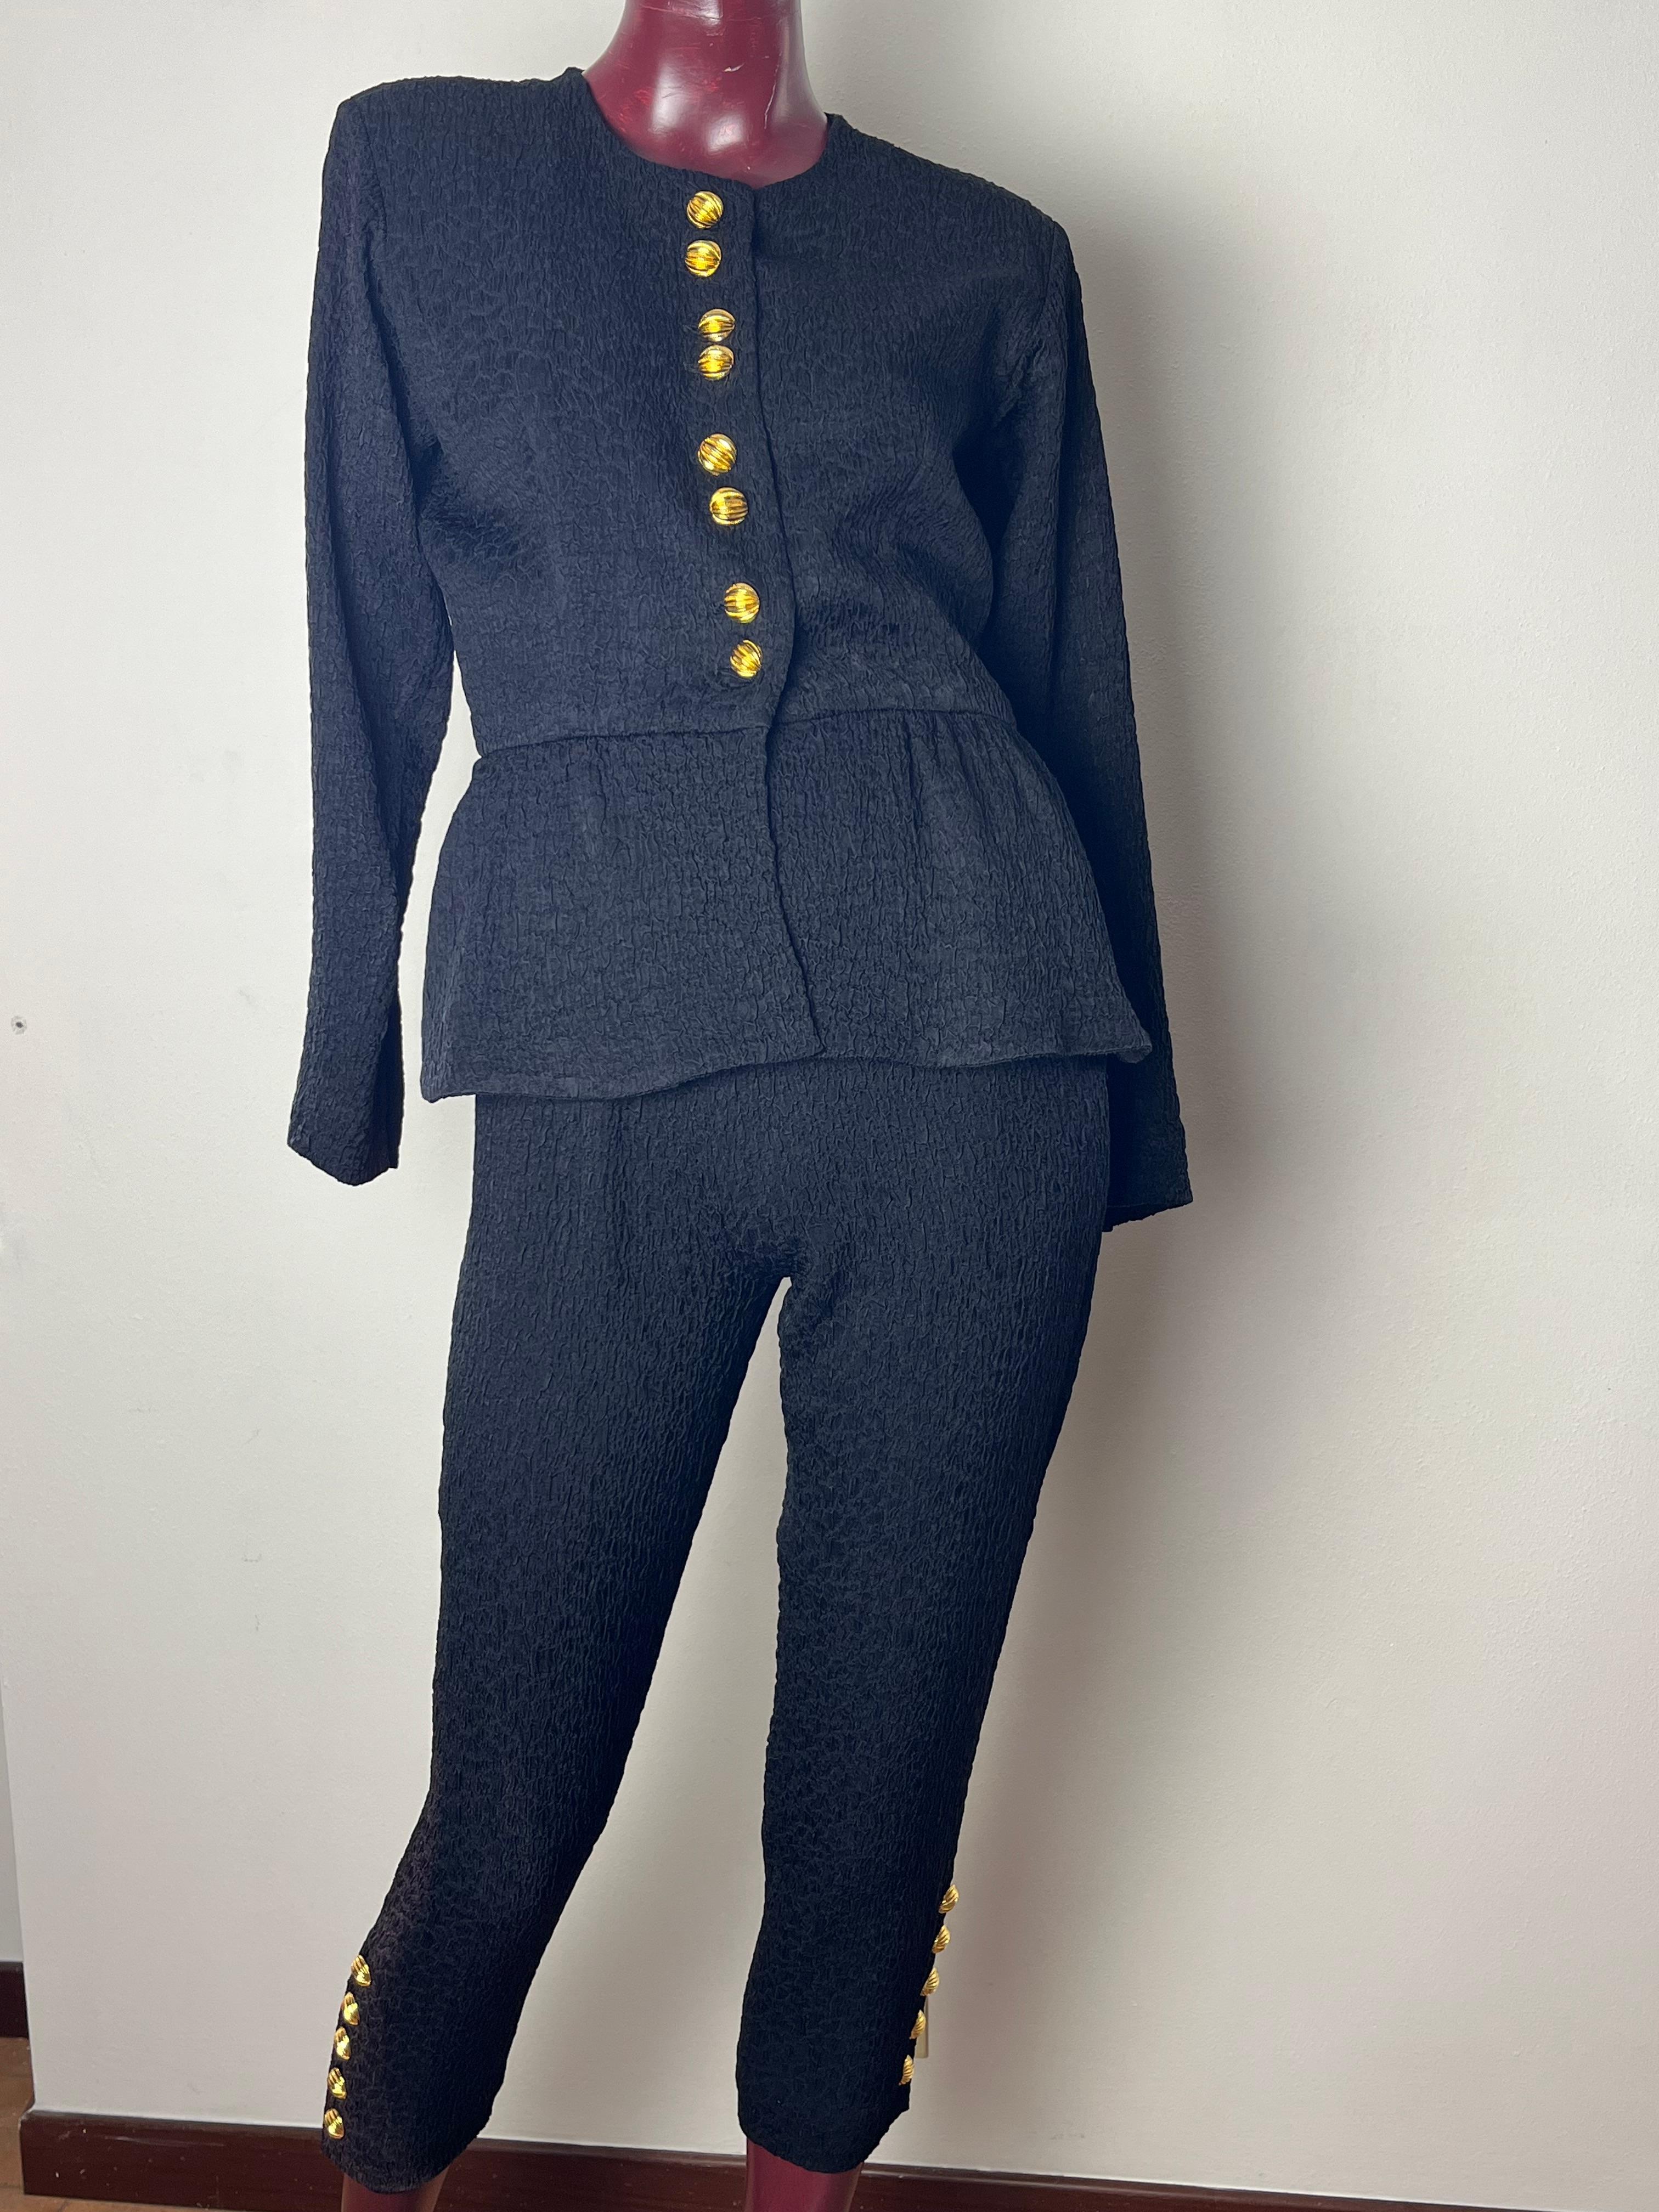 An elegant vintage suit  80s YSL rive gauche black froissè fabric

jacket that closes with gold jewel buttons 8 buttons and 5 buttons per sleeve

tight-fitting mid-calf pants  with buttons on the finish  5 buttons per side , zipper and button side